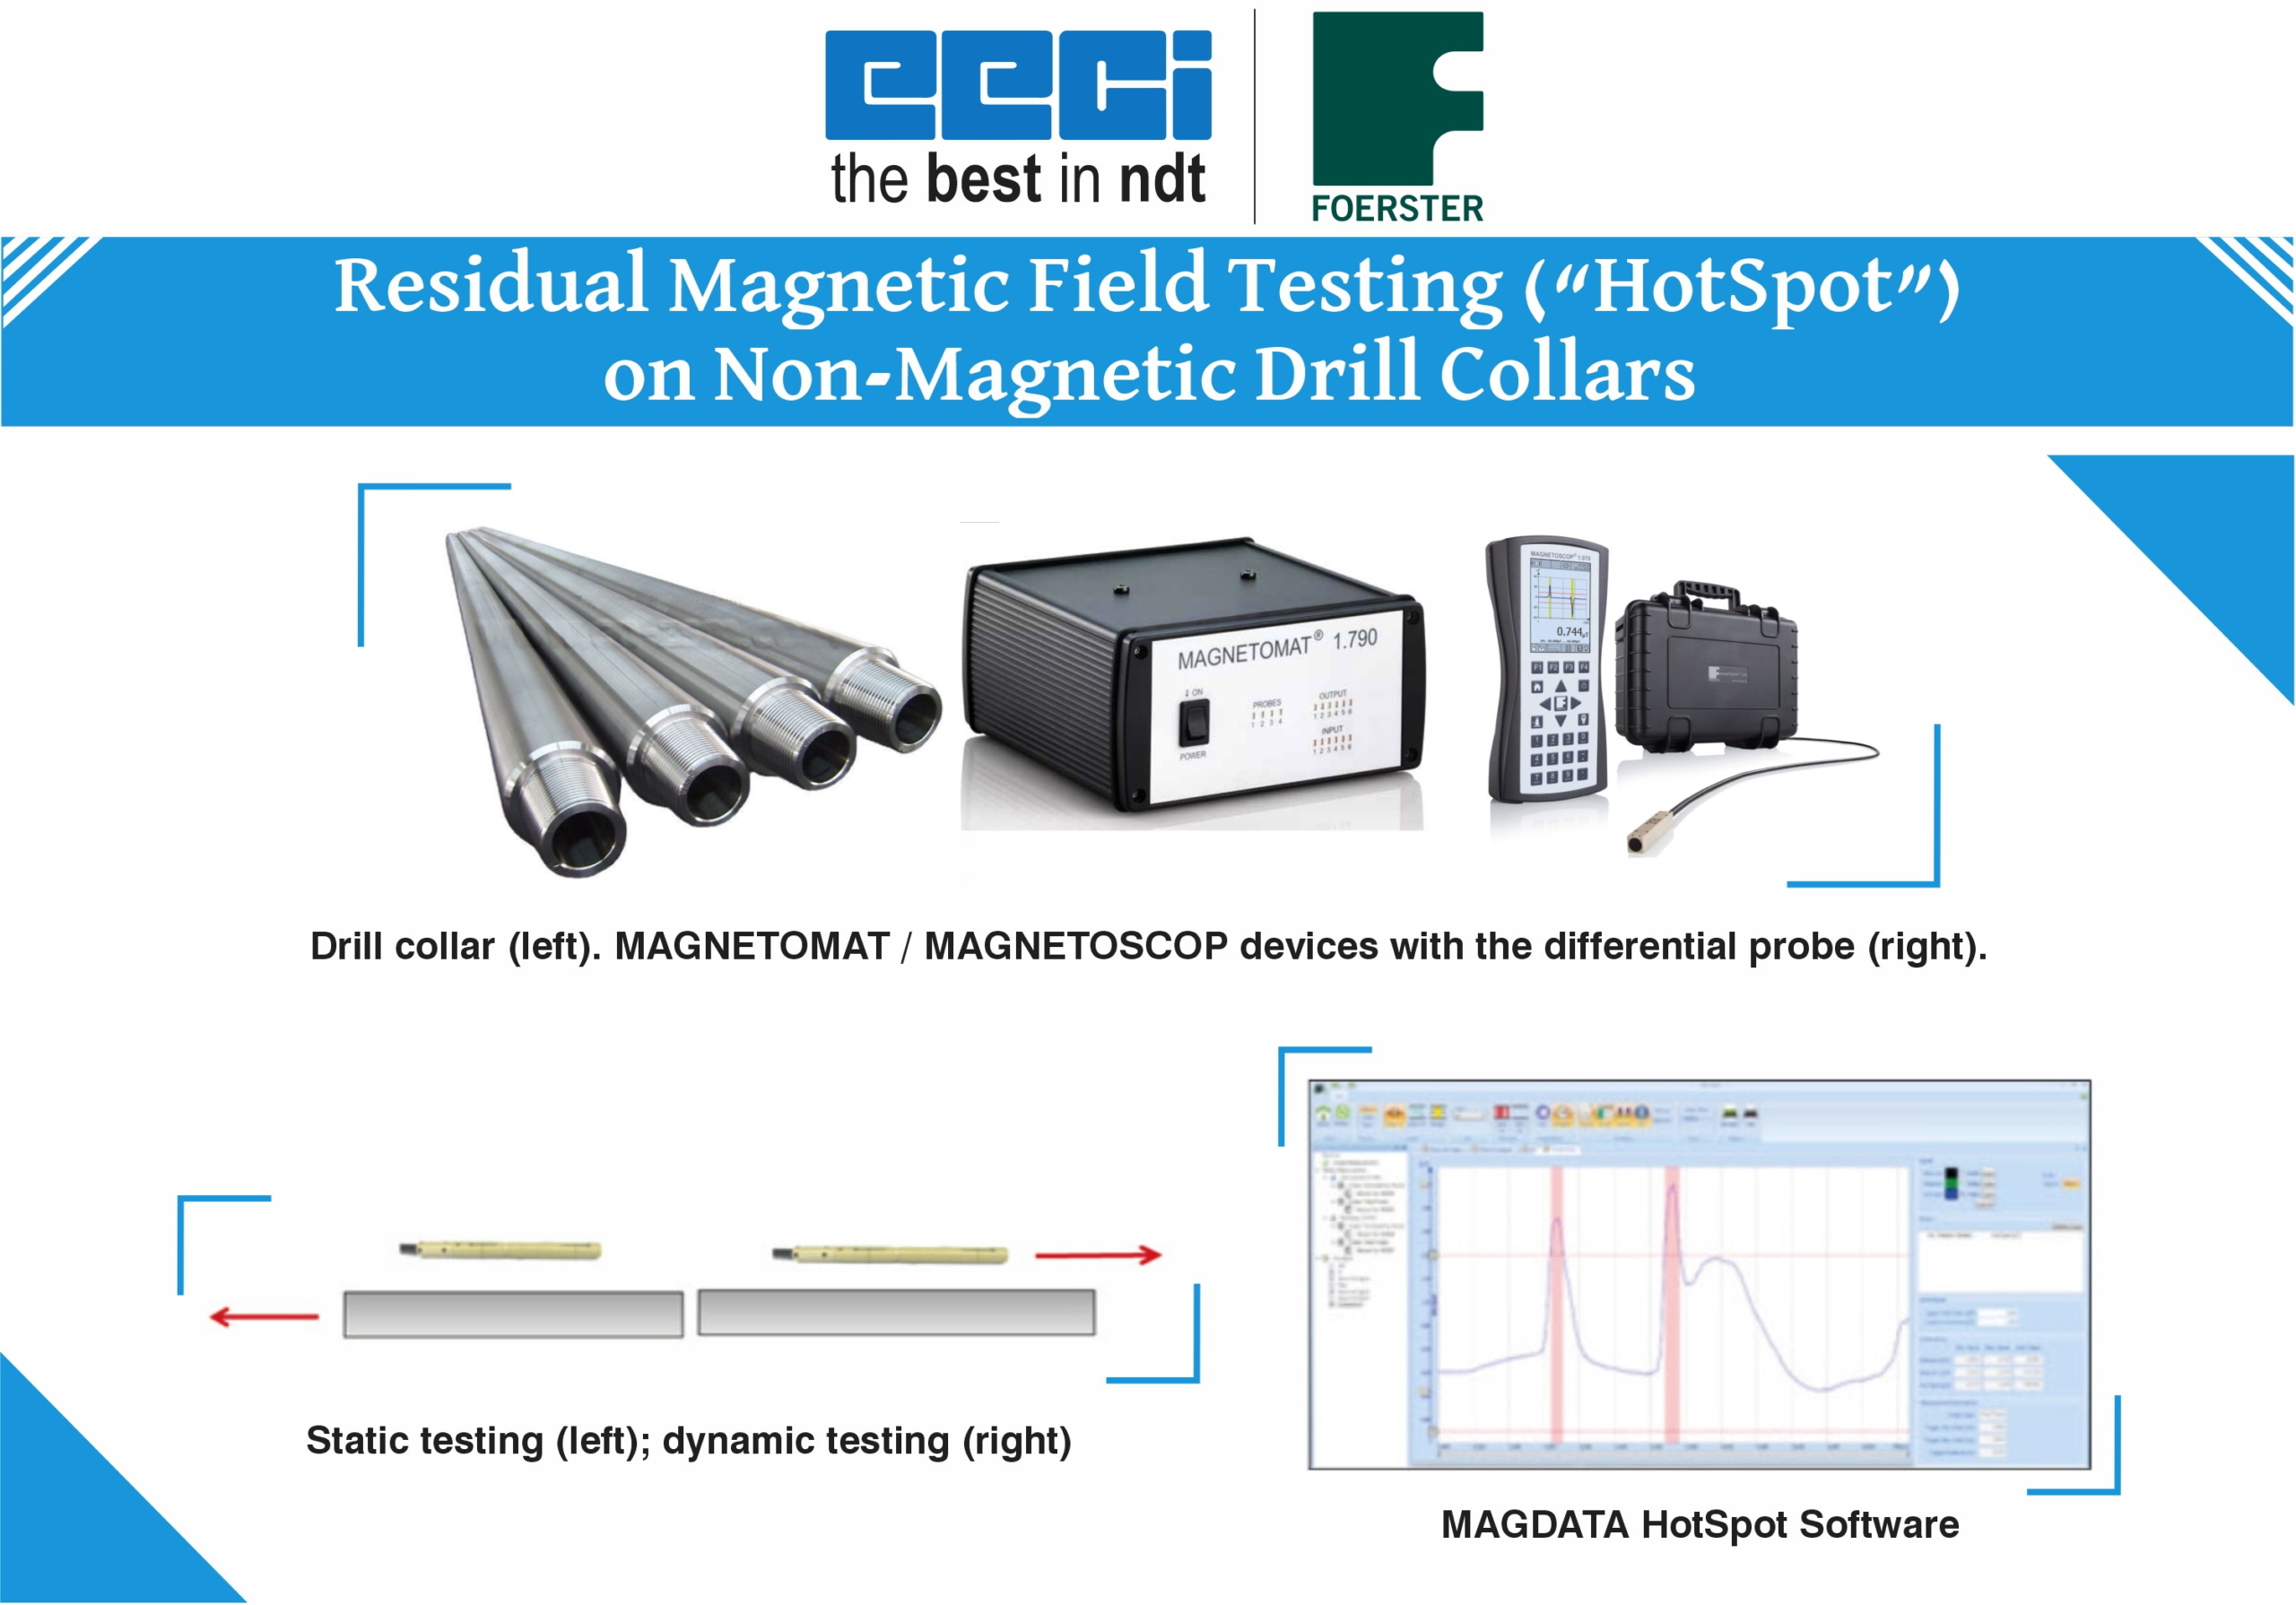 Residual Magnetic Field Testing (“HotSpot”) on Non-Magnetic Drill Collars